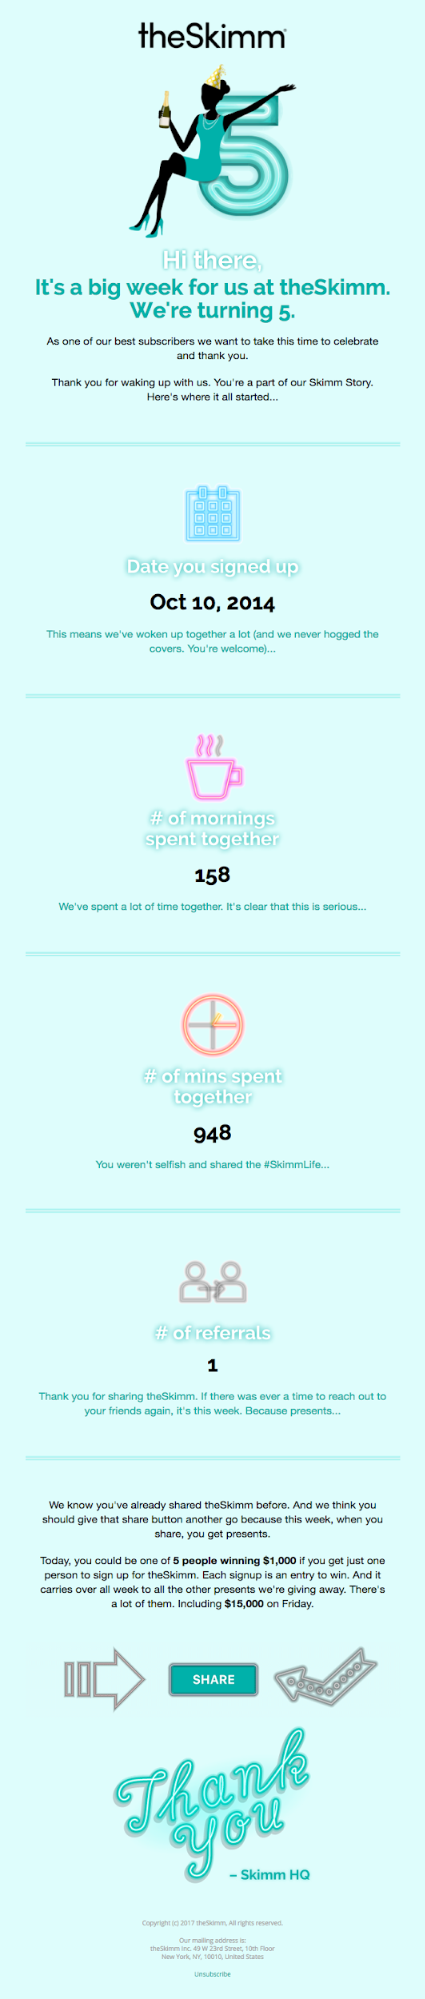 A personalized milestone email by theSkimm